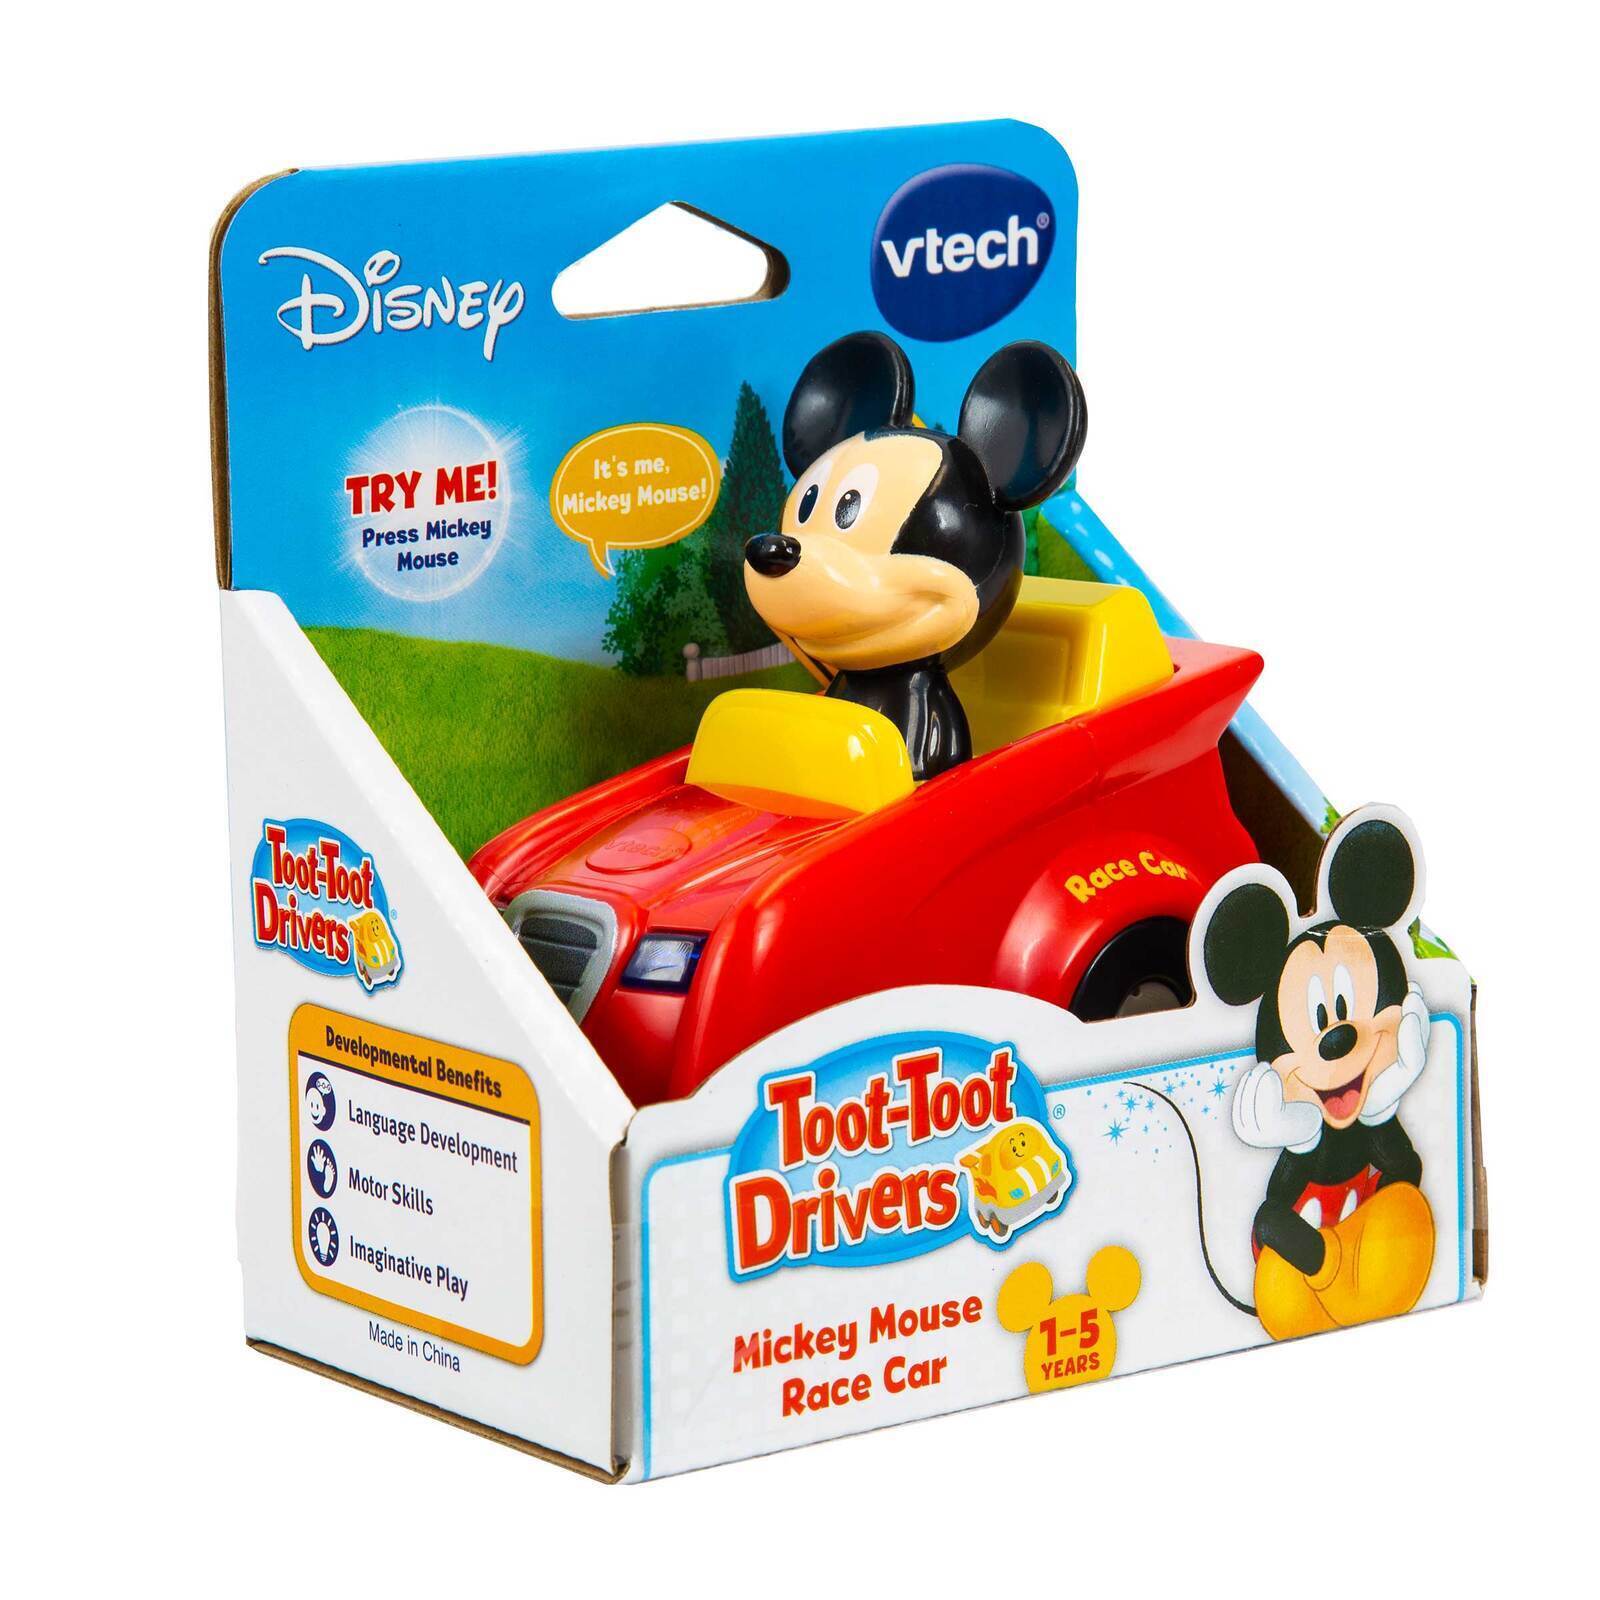 Vtech Toot-Toot Drivers Mickey Mouse Race Car